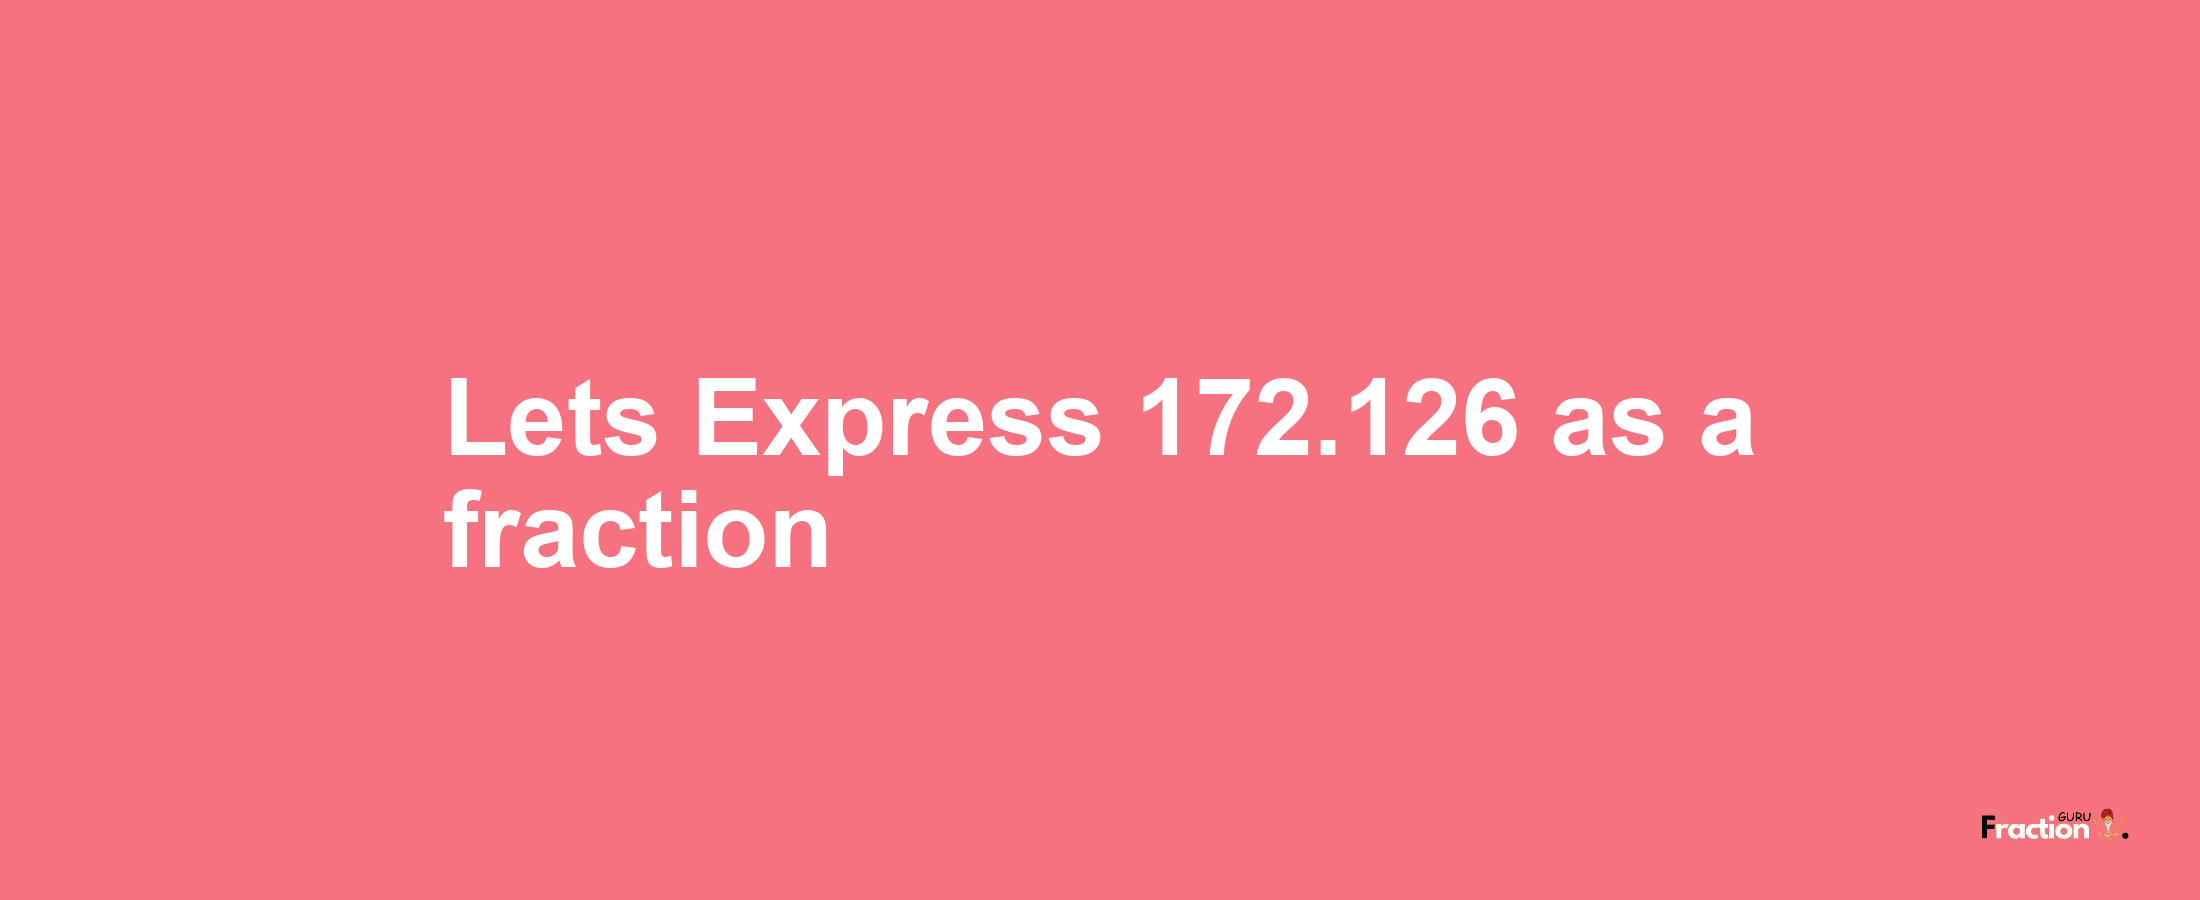 Lets Express 172.126 as afraction